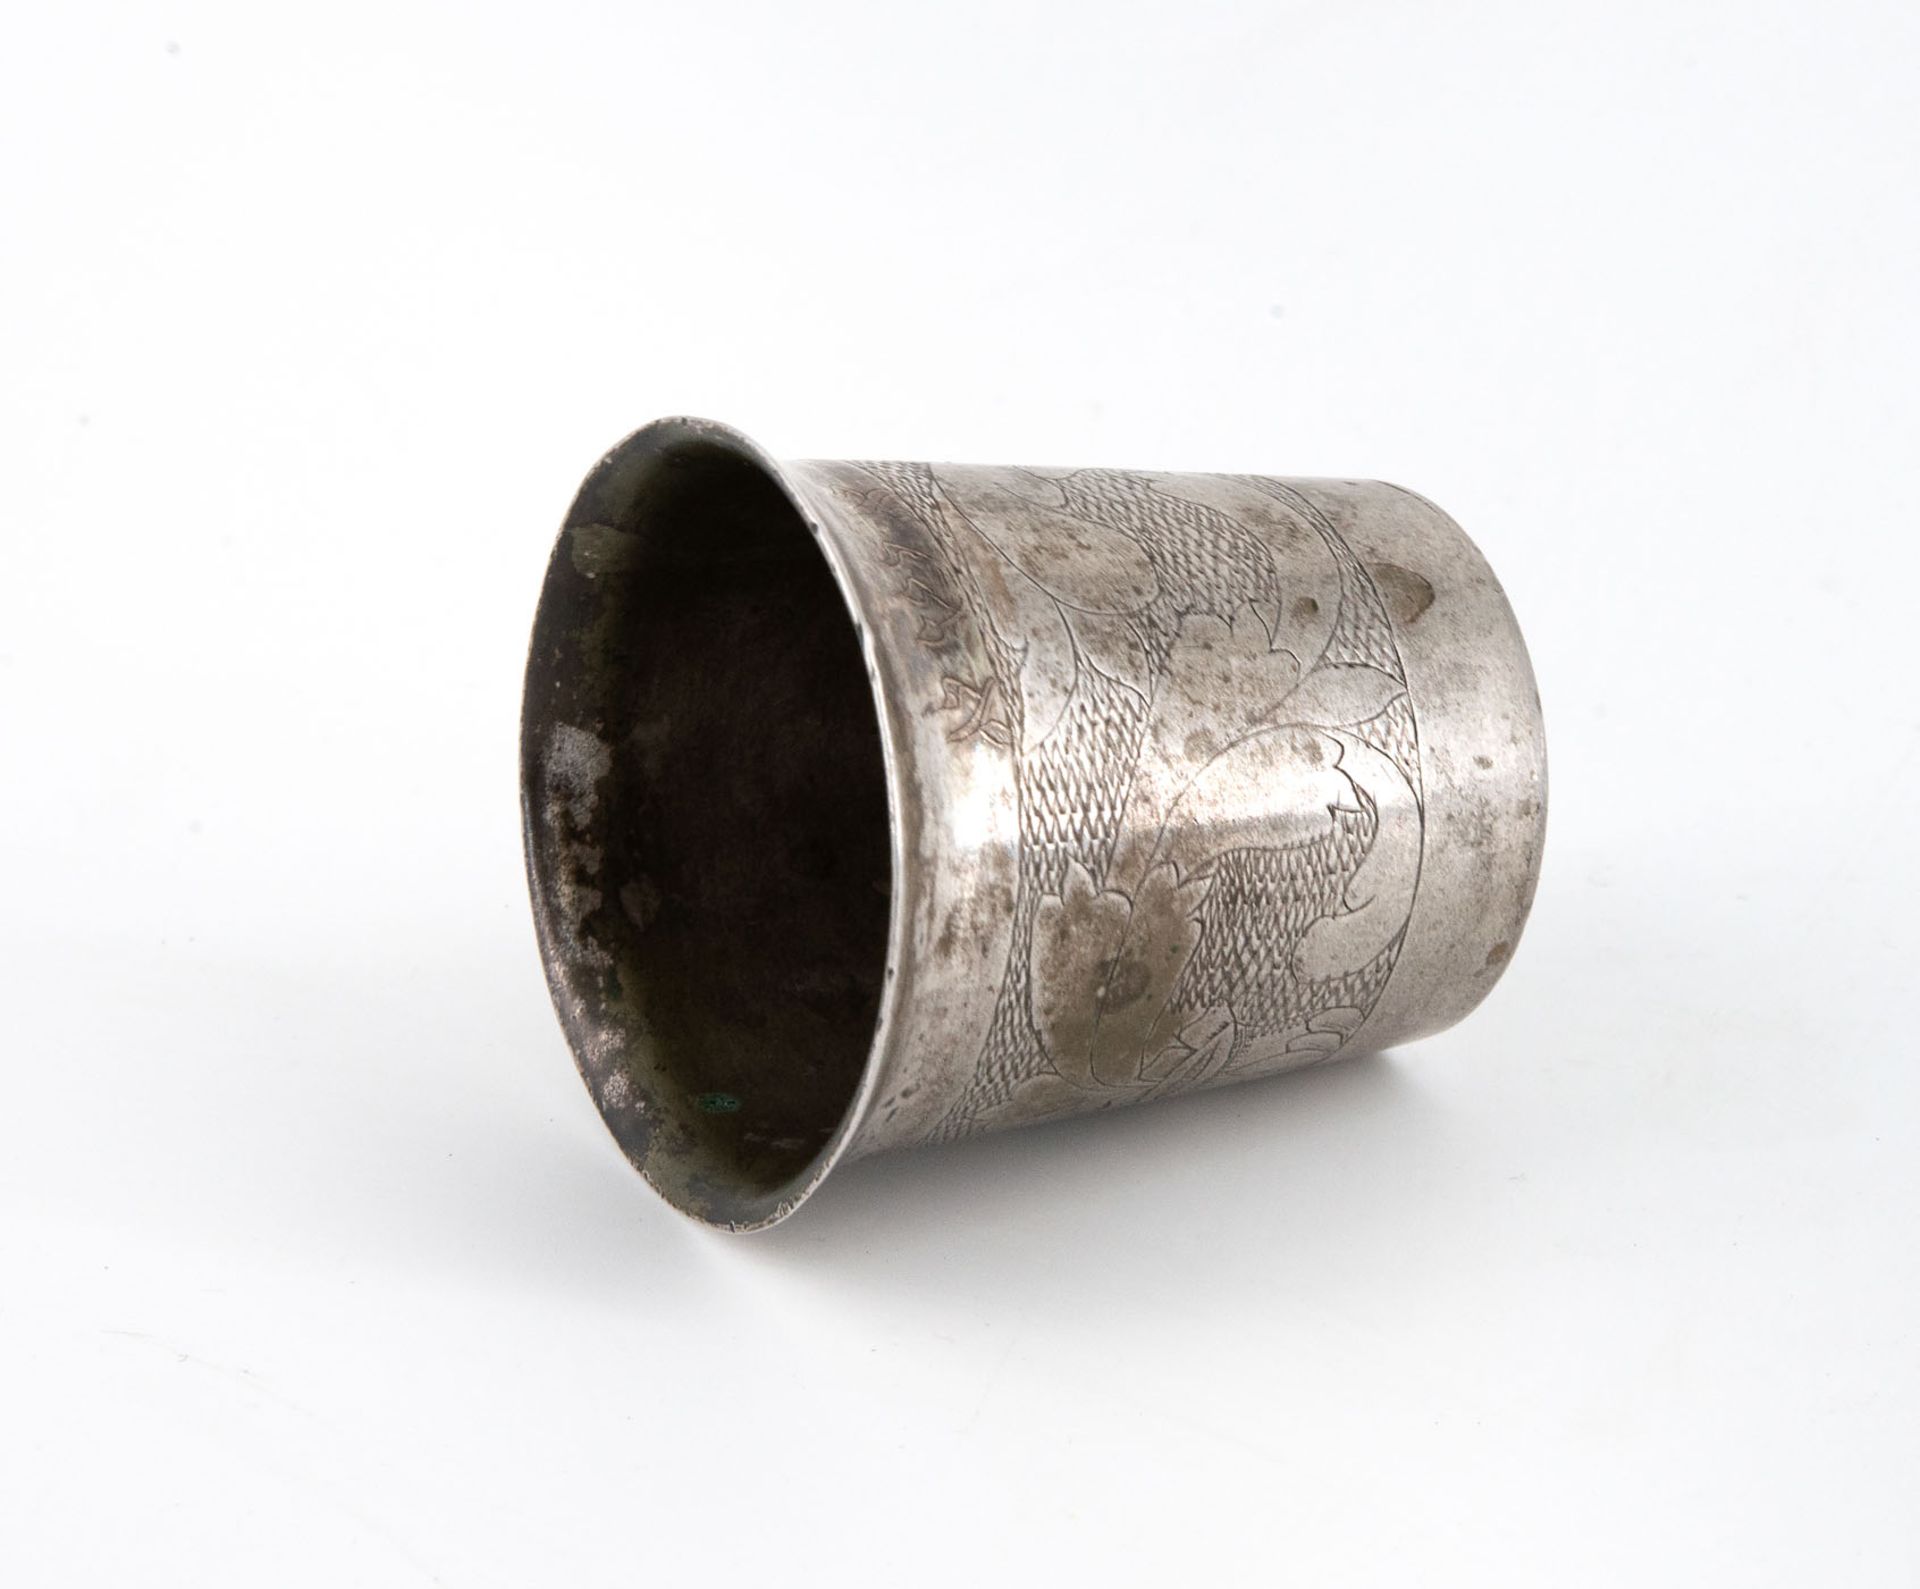 A Silver Kiddush Cup, Poland, Late 18th Early 19th Century - Image 5 of 5